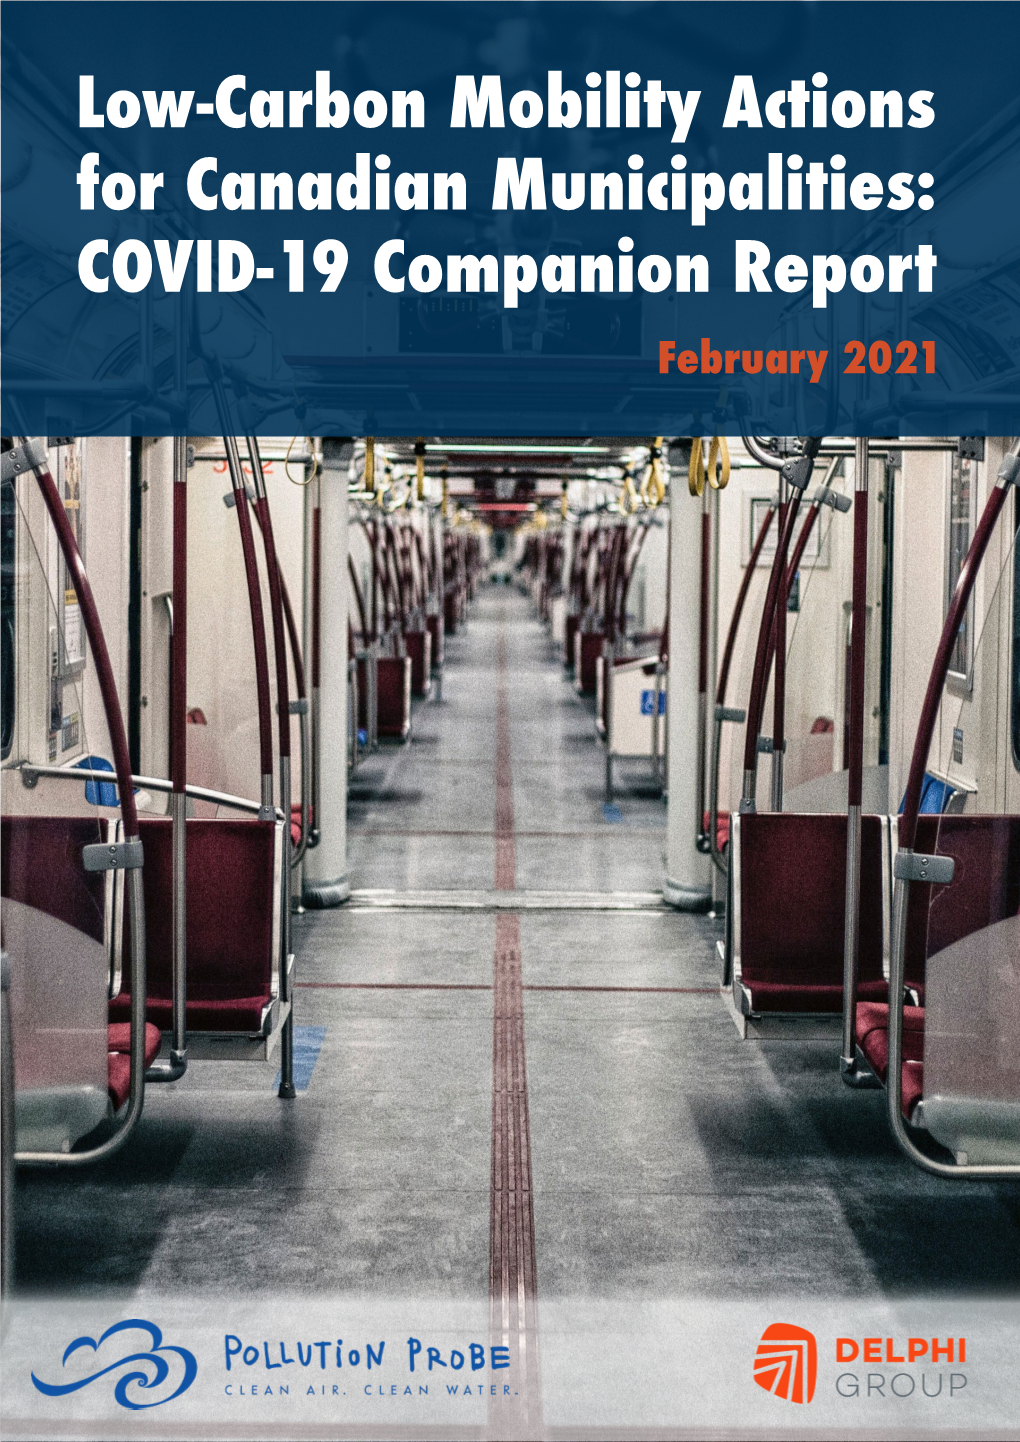 Low-Carbon Mobility Actions for Canadian Municipalities: COVID-19